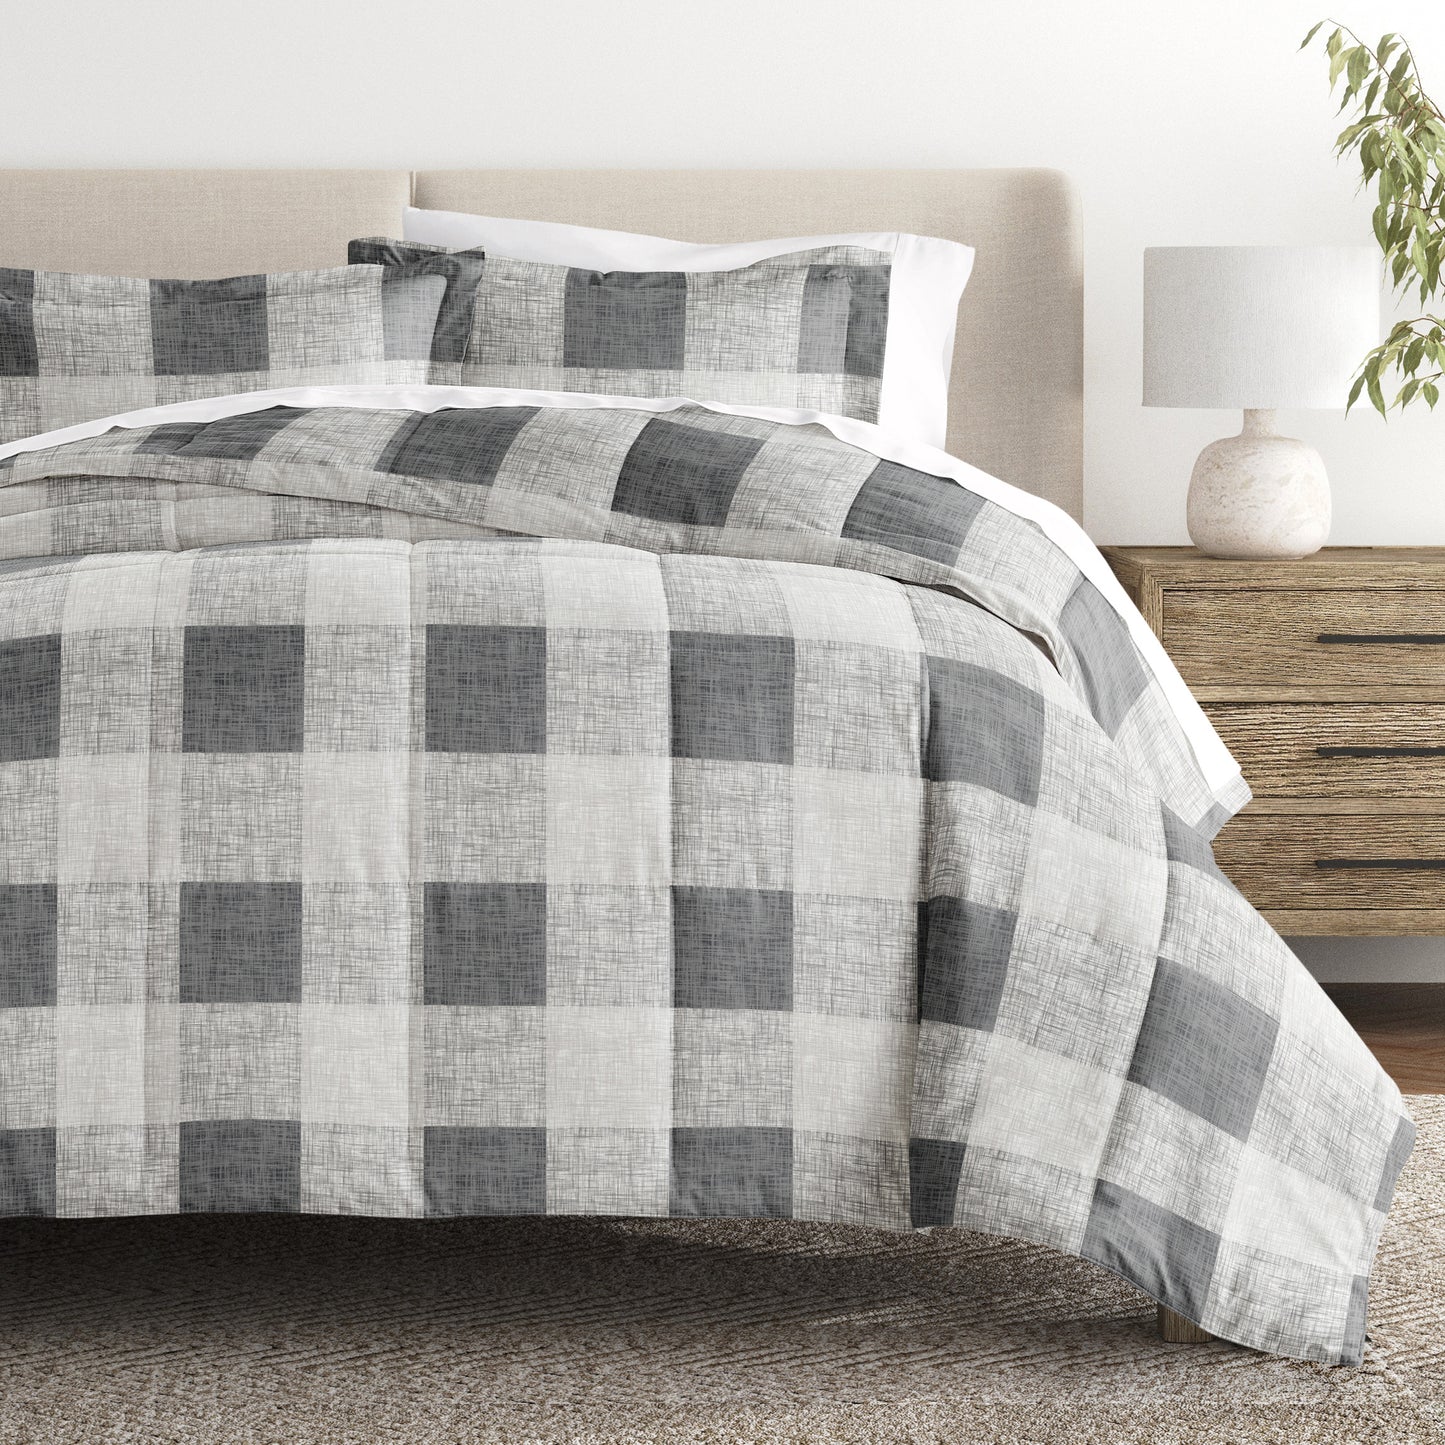 Comforter Sets in Beautiful Patterns